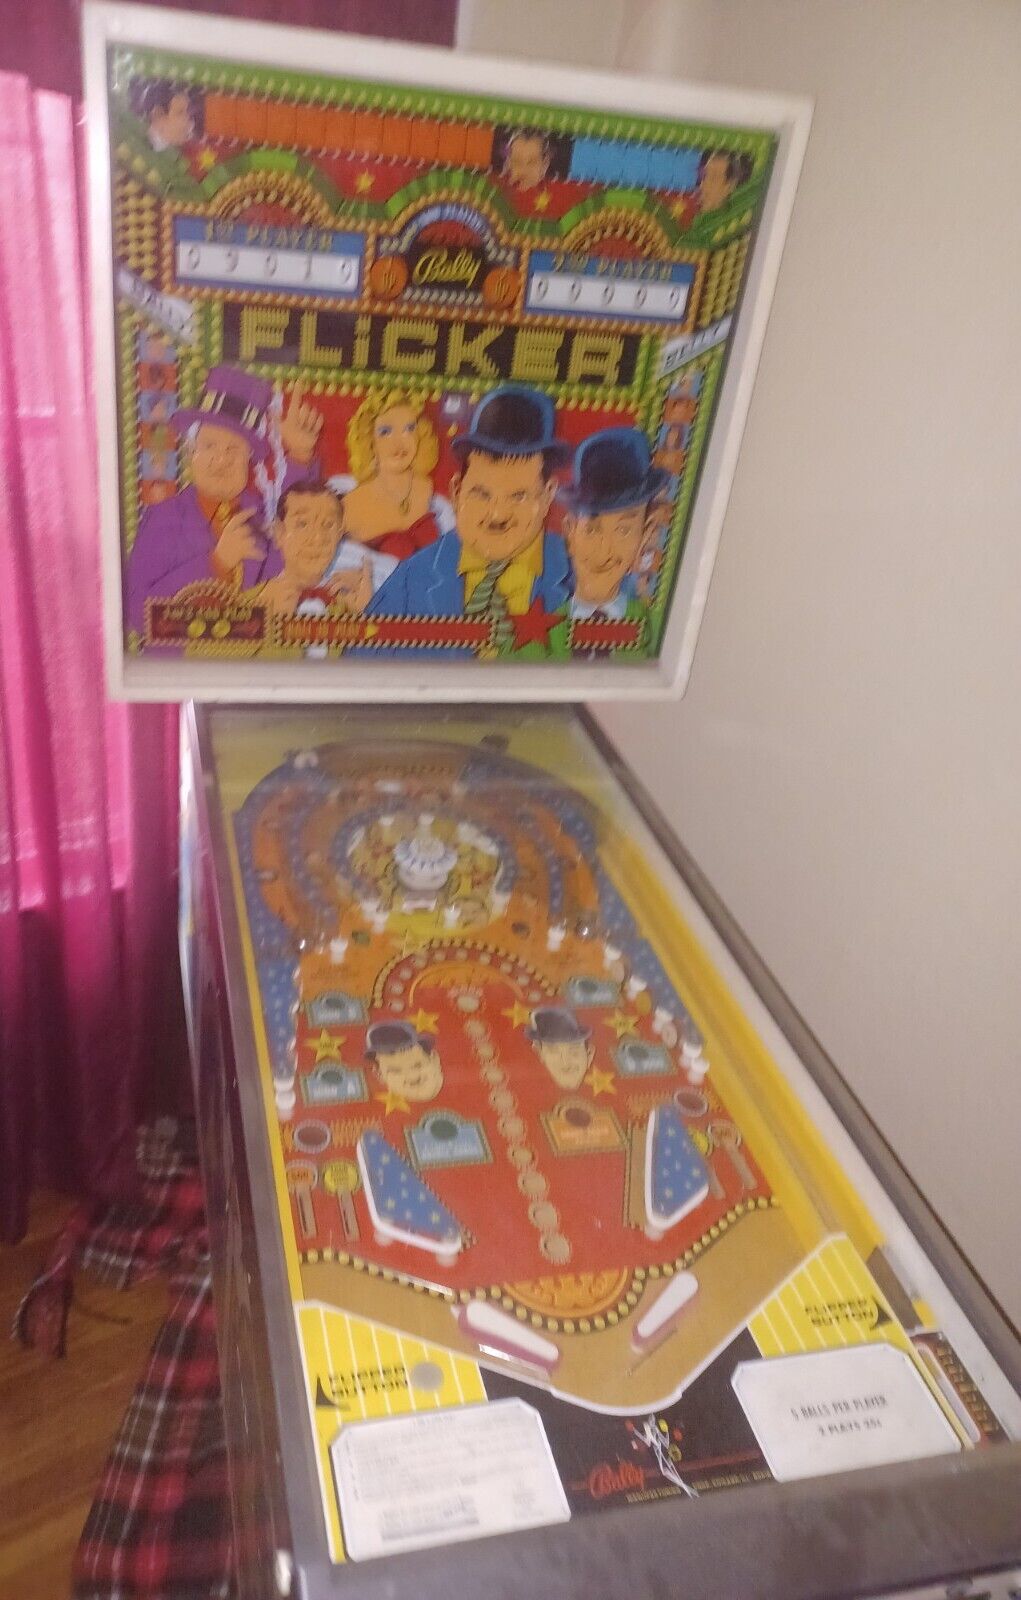 1975 BALLY FLICKER FULL SIZE PINBALL COIN OPERATED ARCADE GAME ESTATE FIND AS-IS